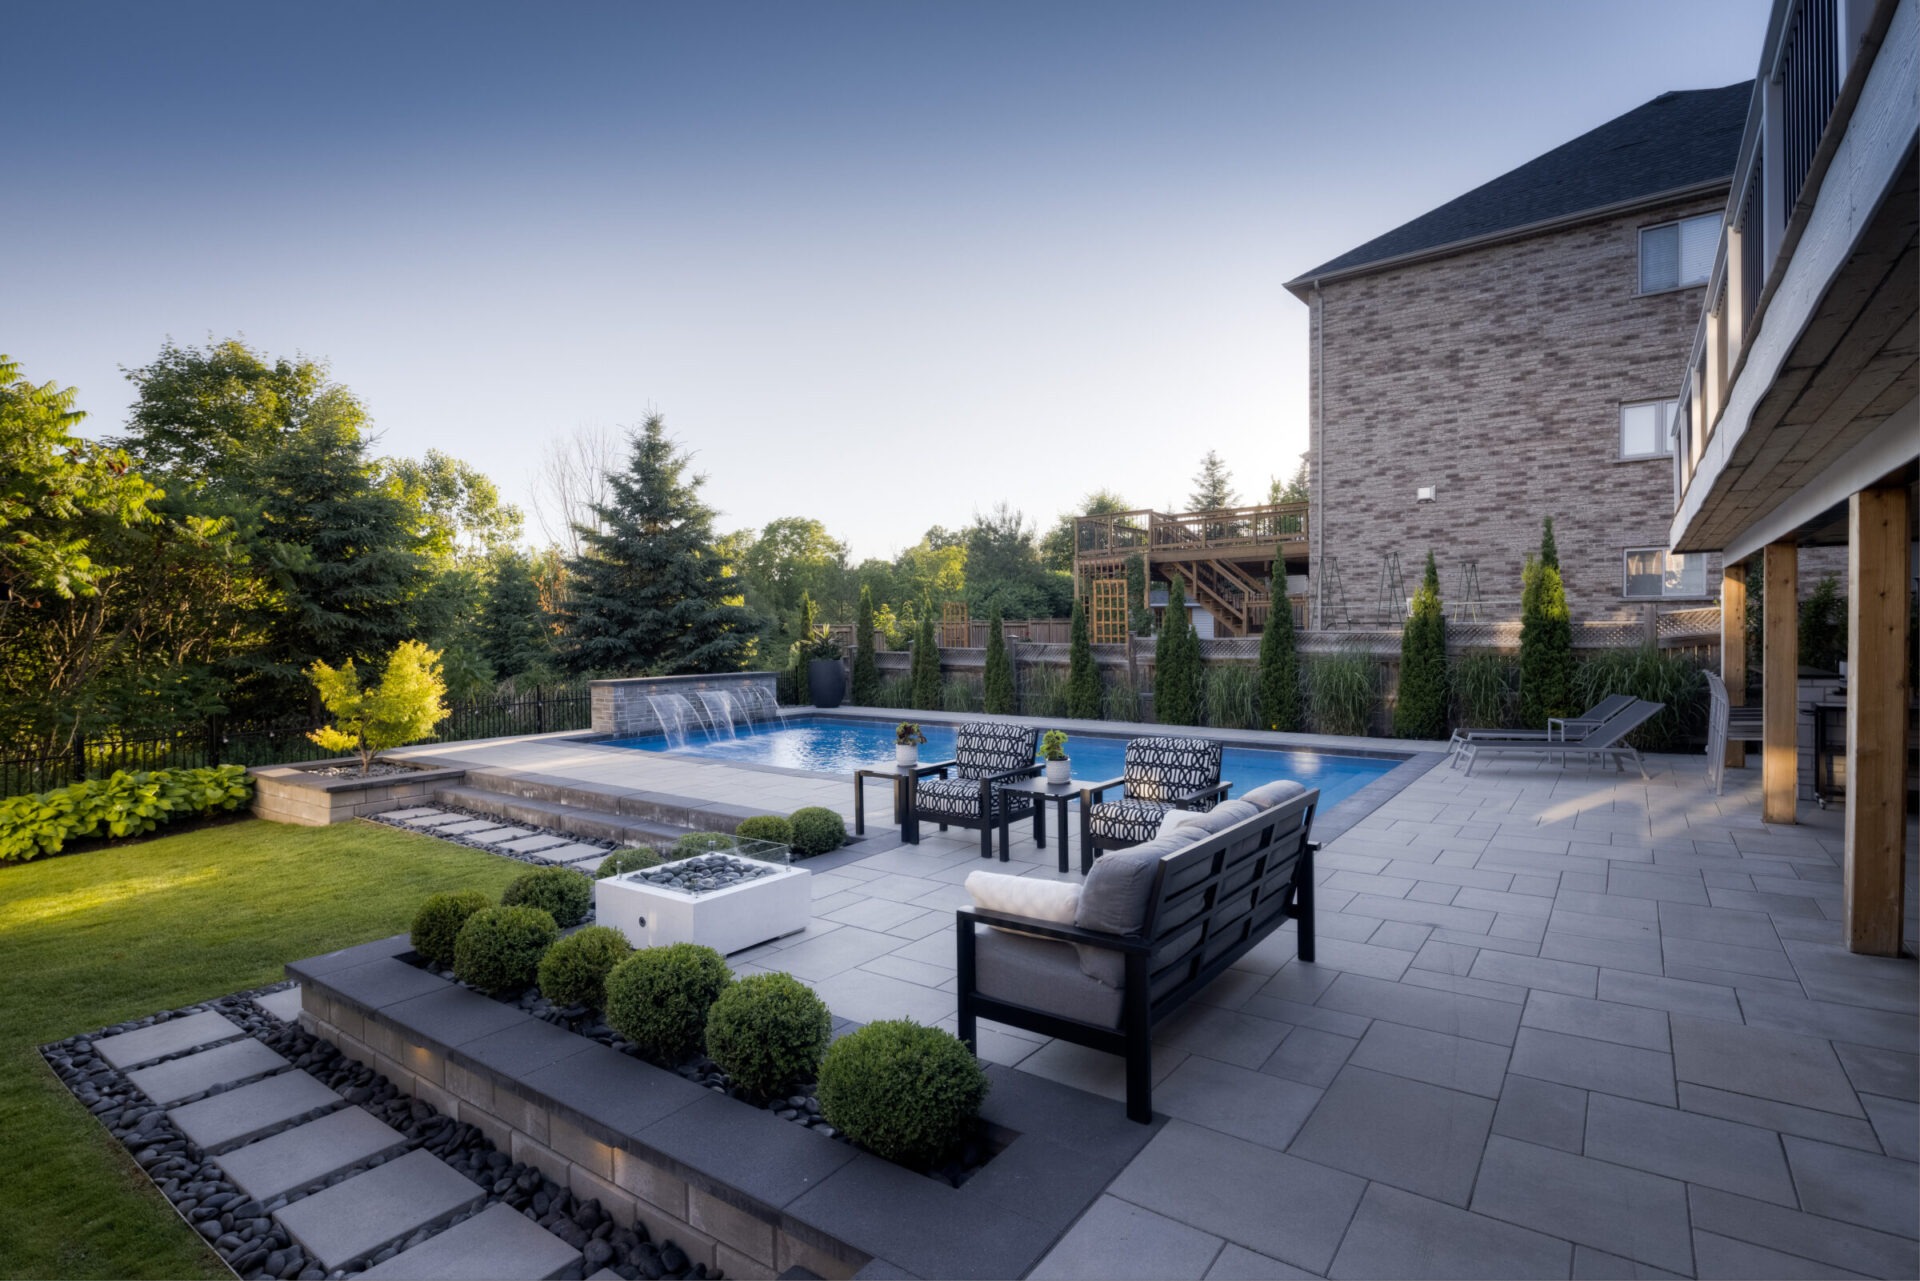 An elegant backyard featuring a swimming pool with a fountain, modern patio furniture, landscaped garden, and a wooden deck under a clear blue sky.